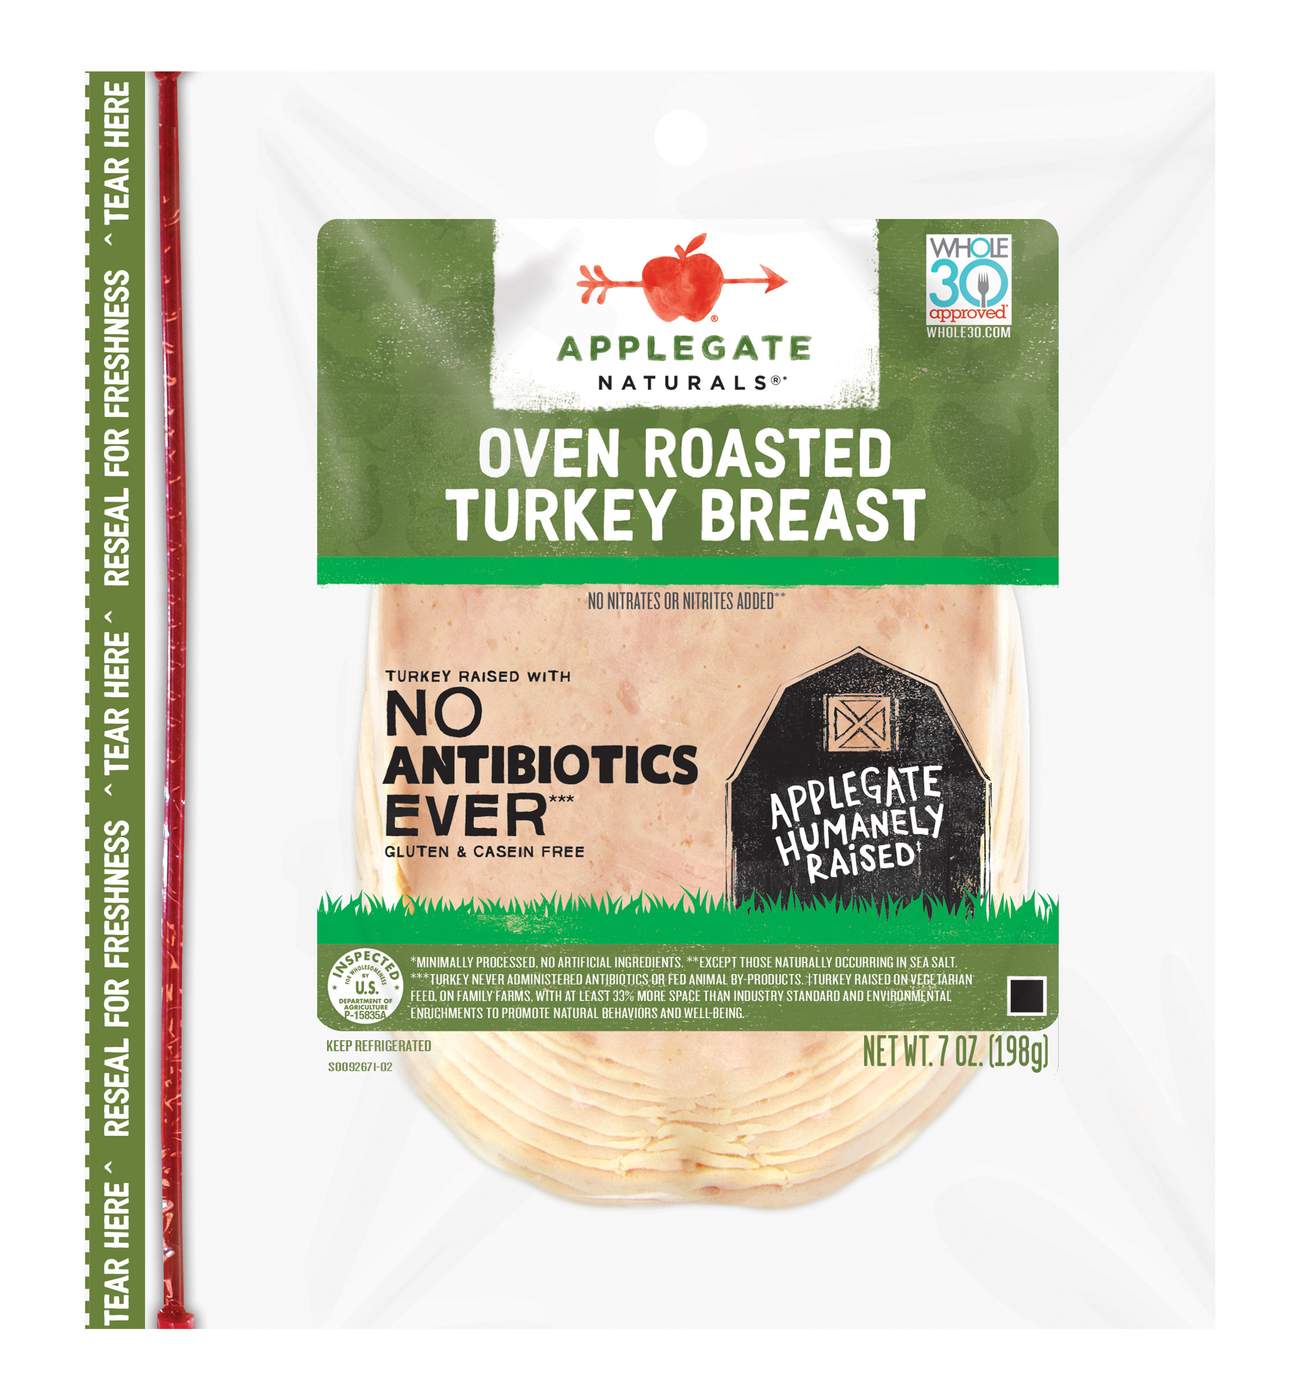 Applegate Naturals Oven Roasted Turkey Breast; image 1 of 2